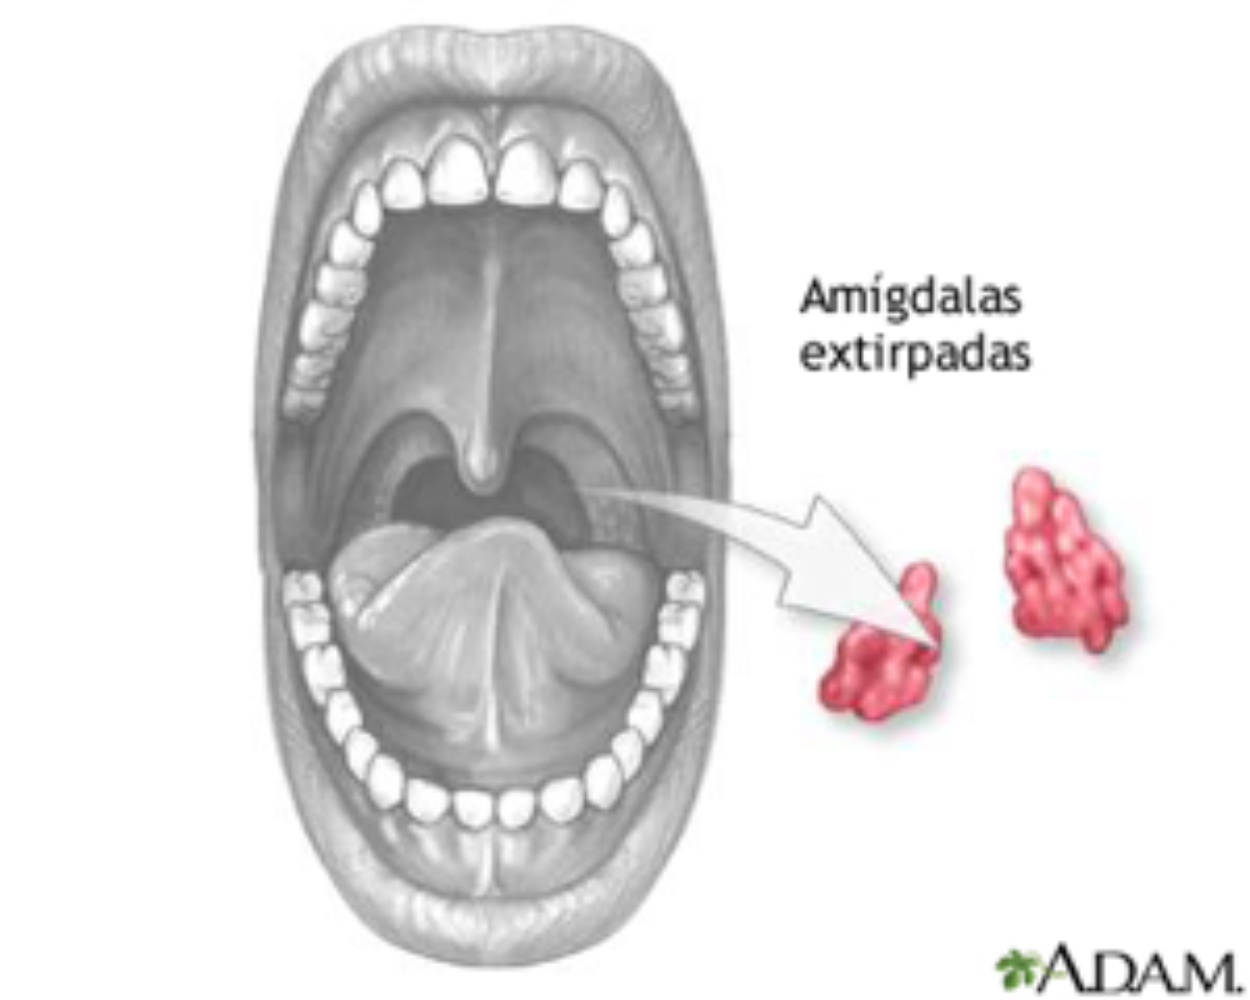 amigdalectomia